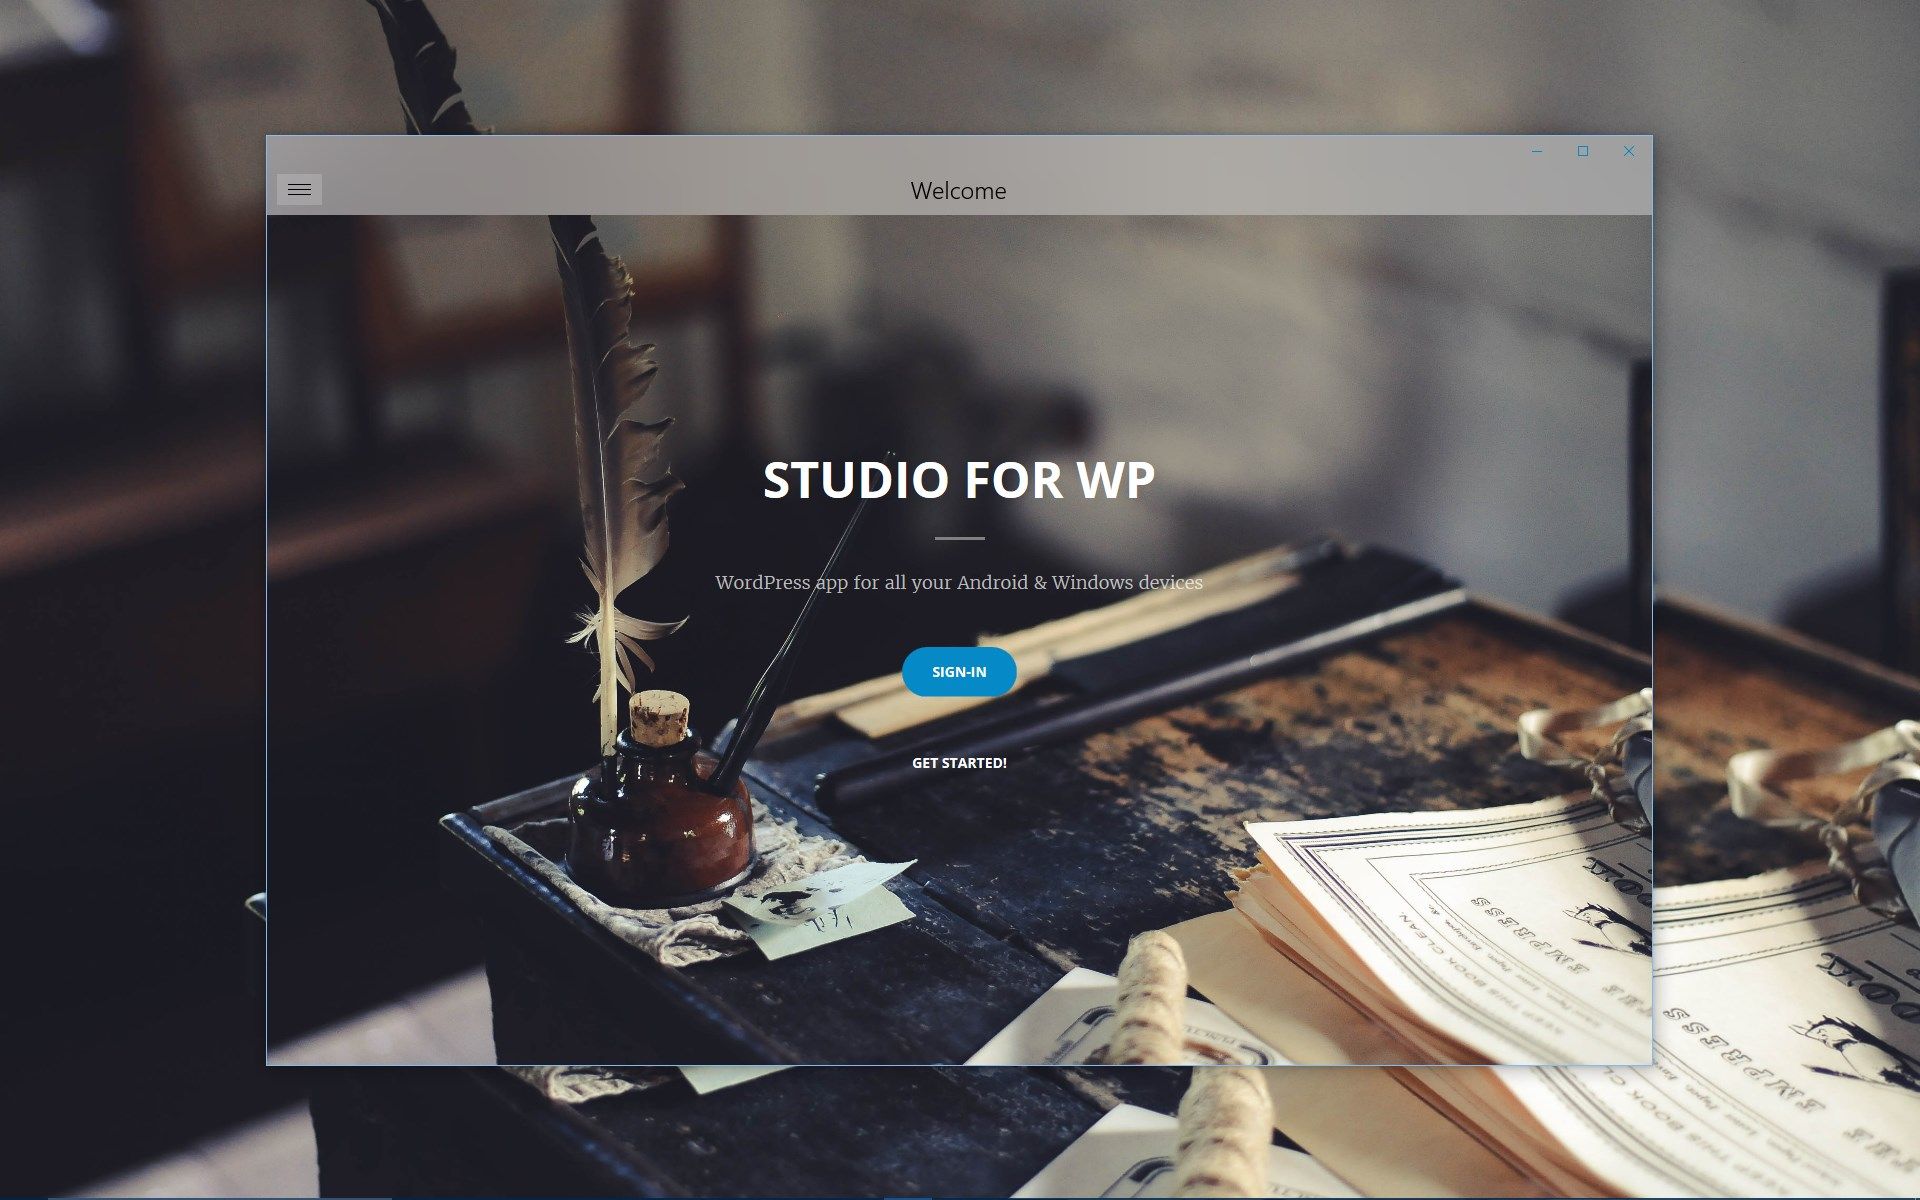 Welcome to Studio for WP - Manage your blogs